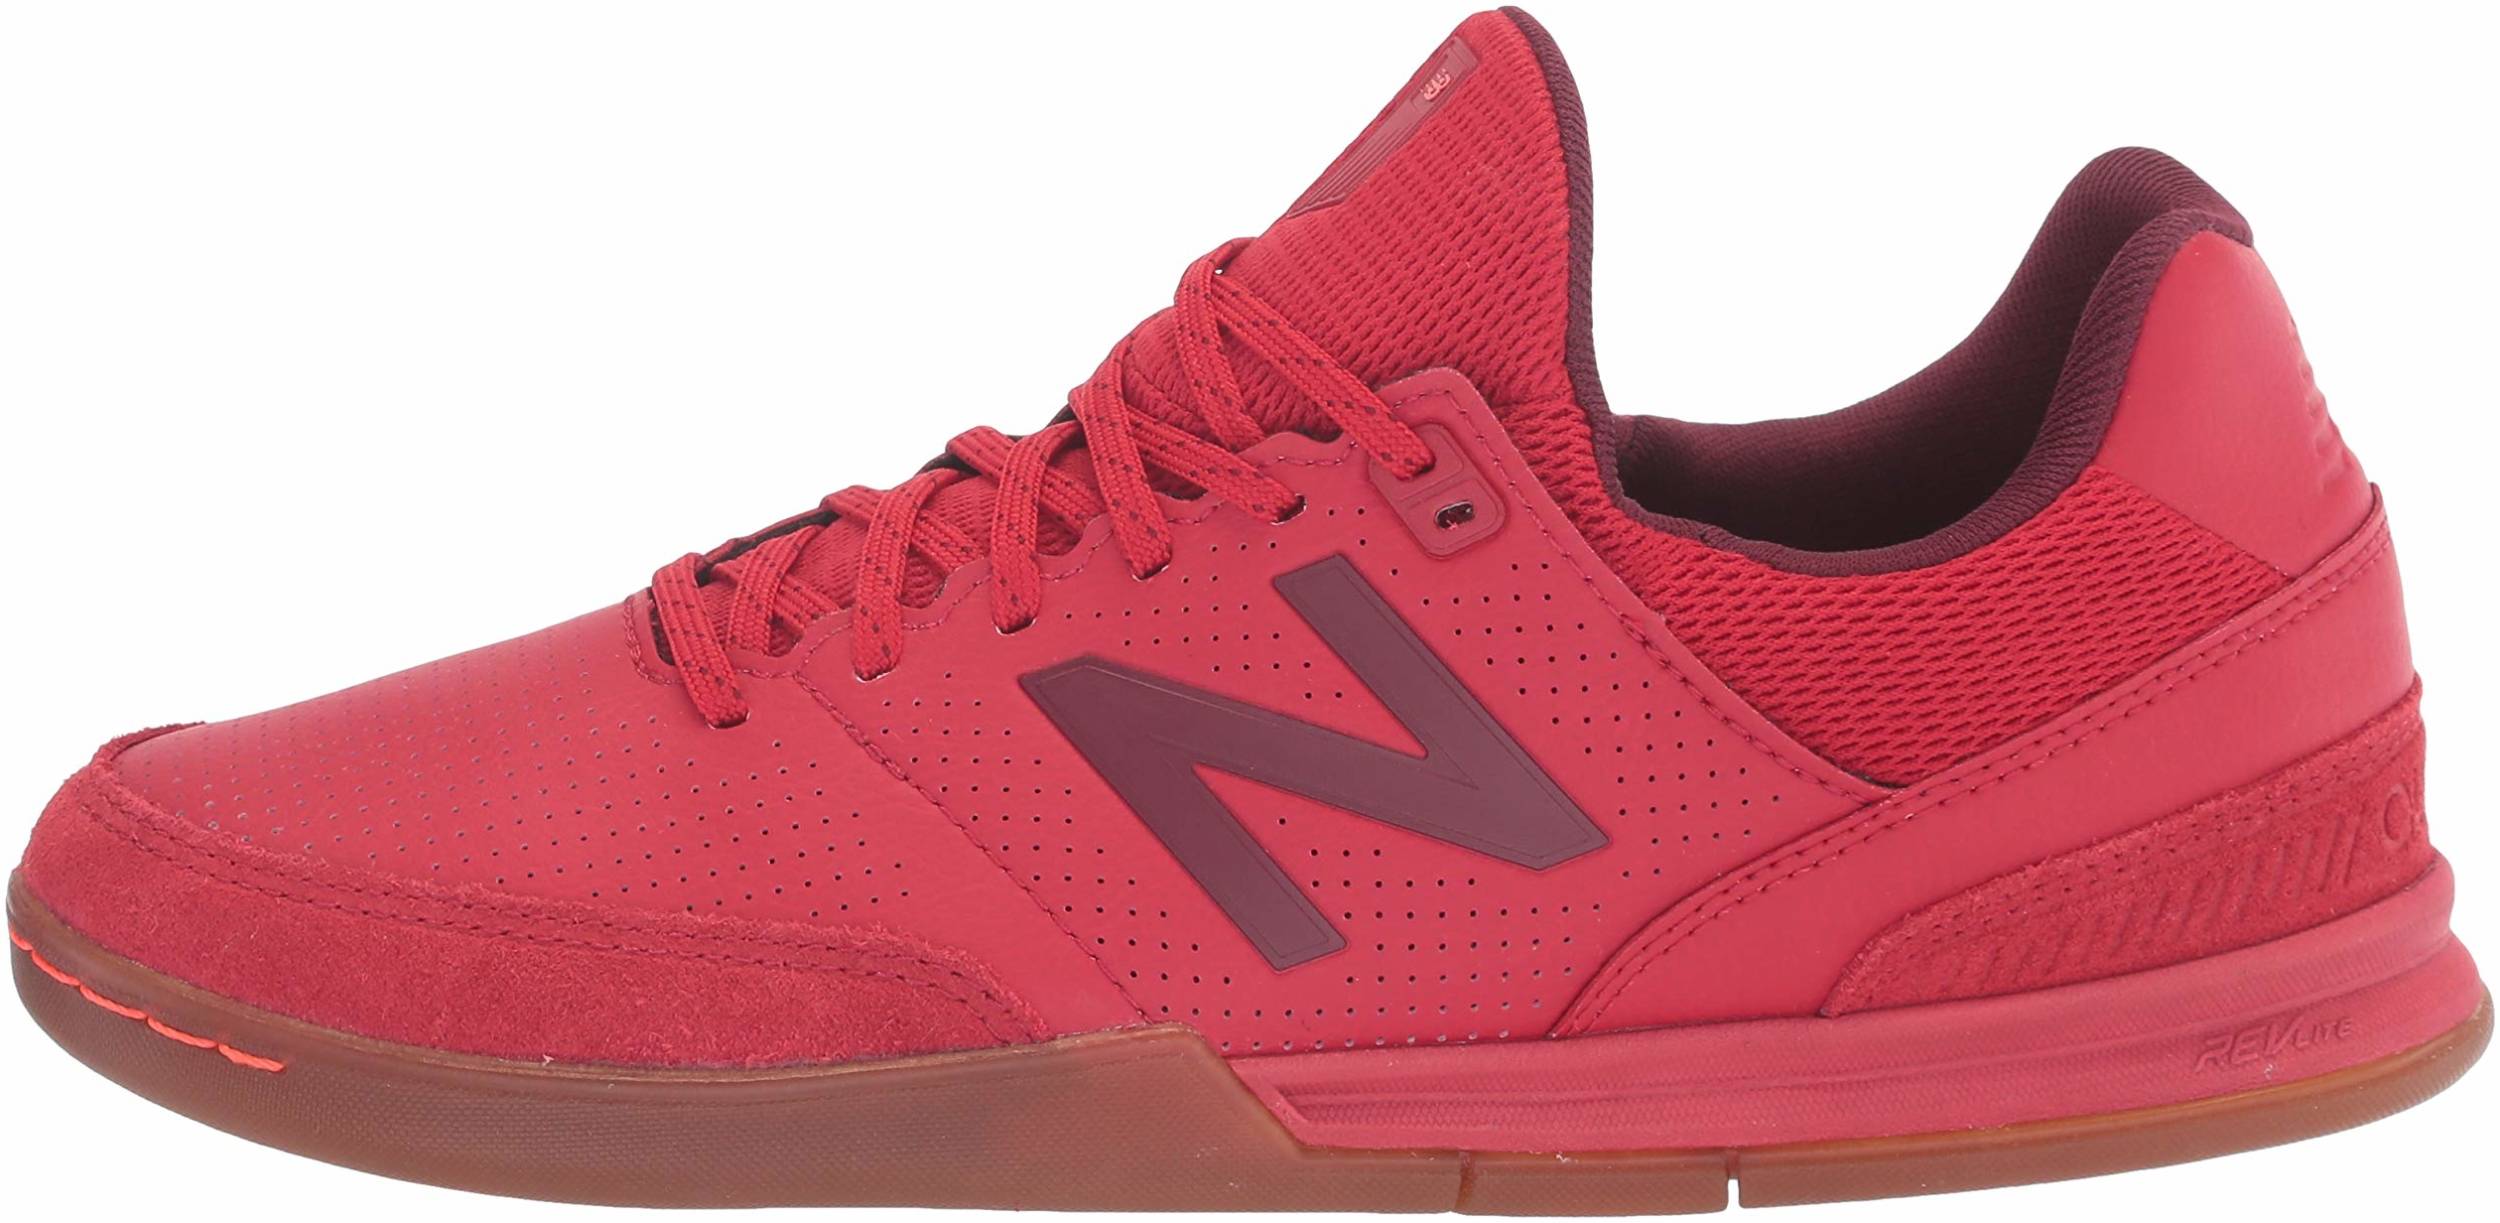 Reasons to/NOT to Buy New Balance Audazo V4 Pro Indoor (Sep 2021 ...